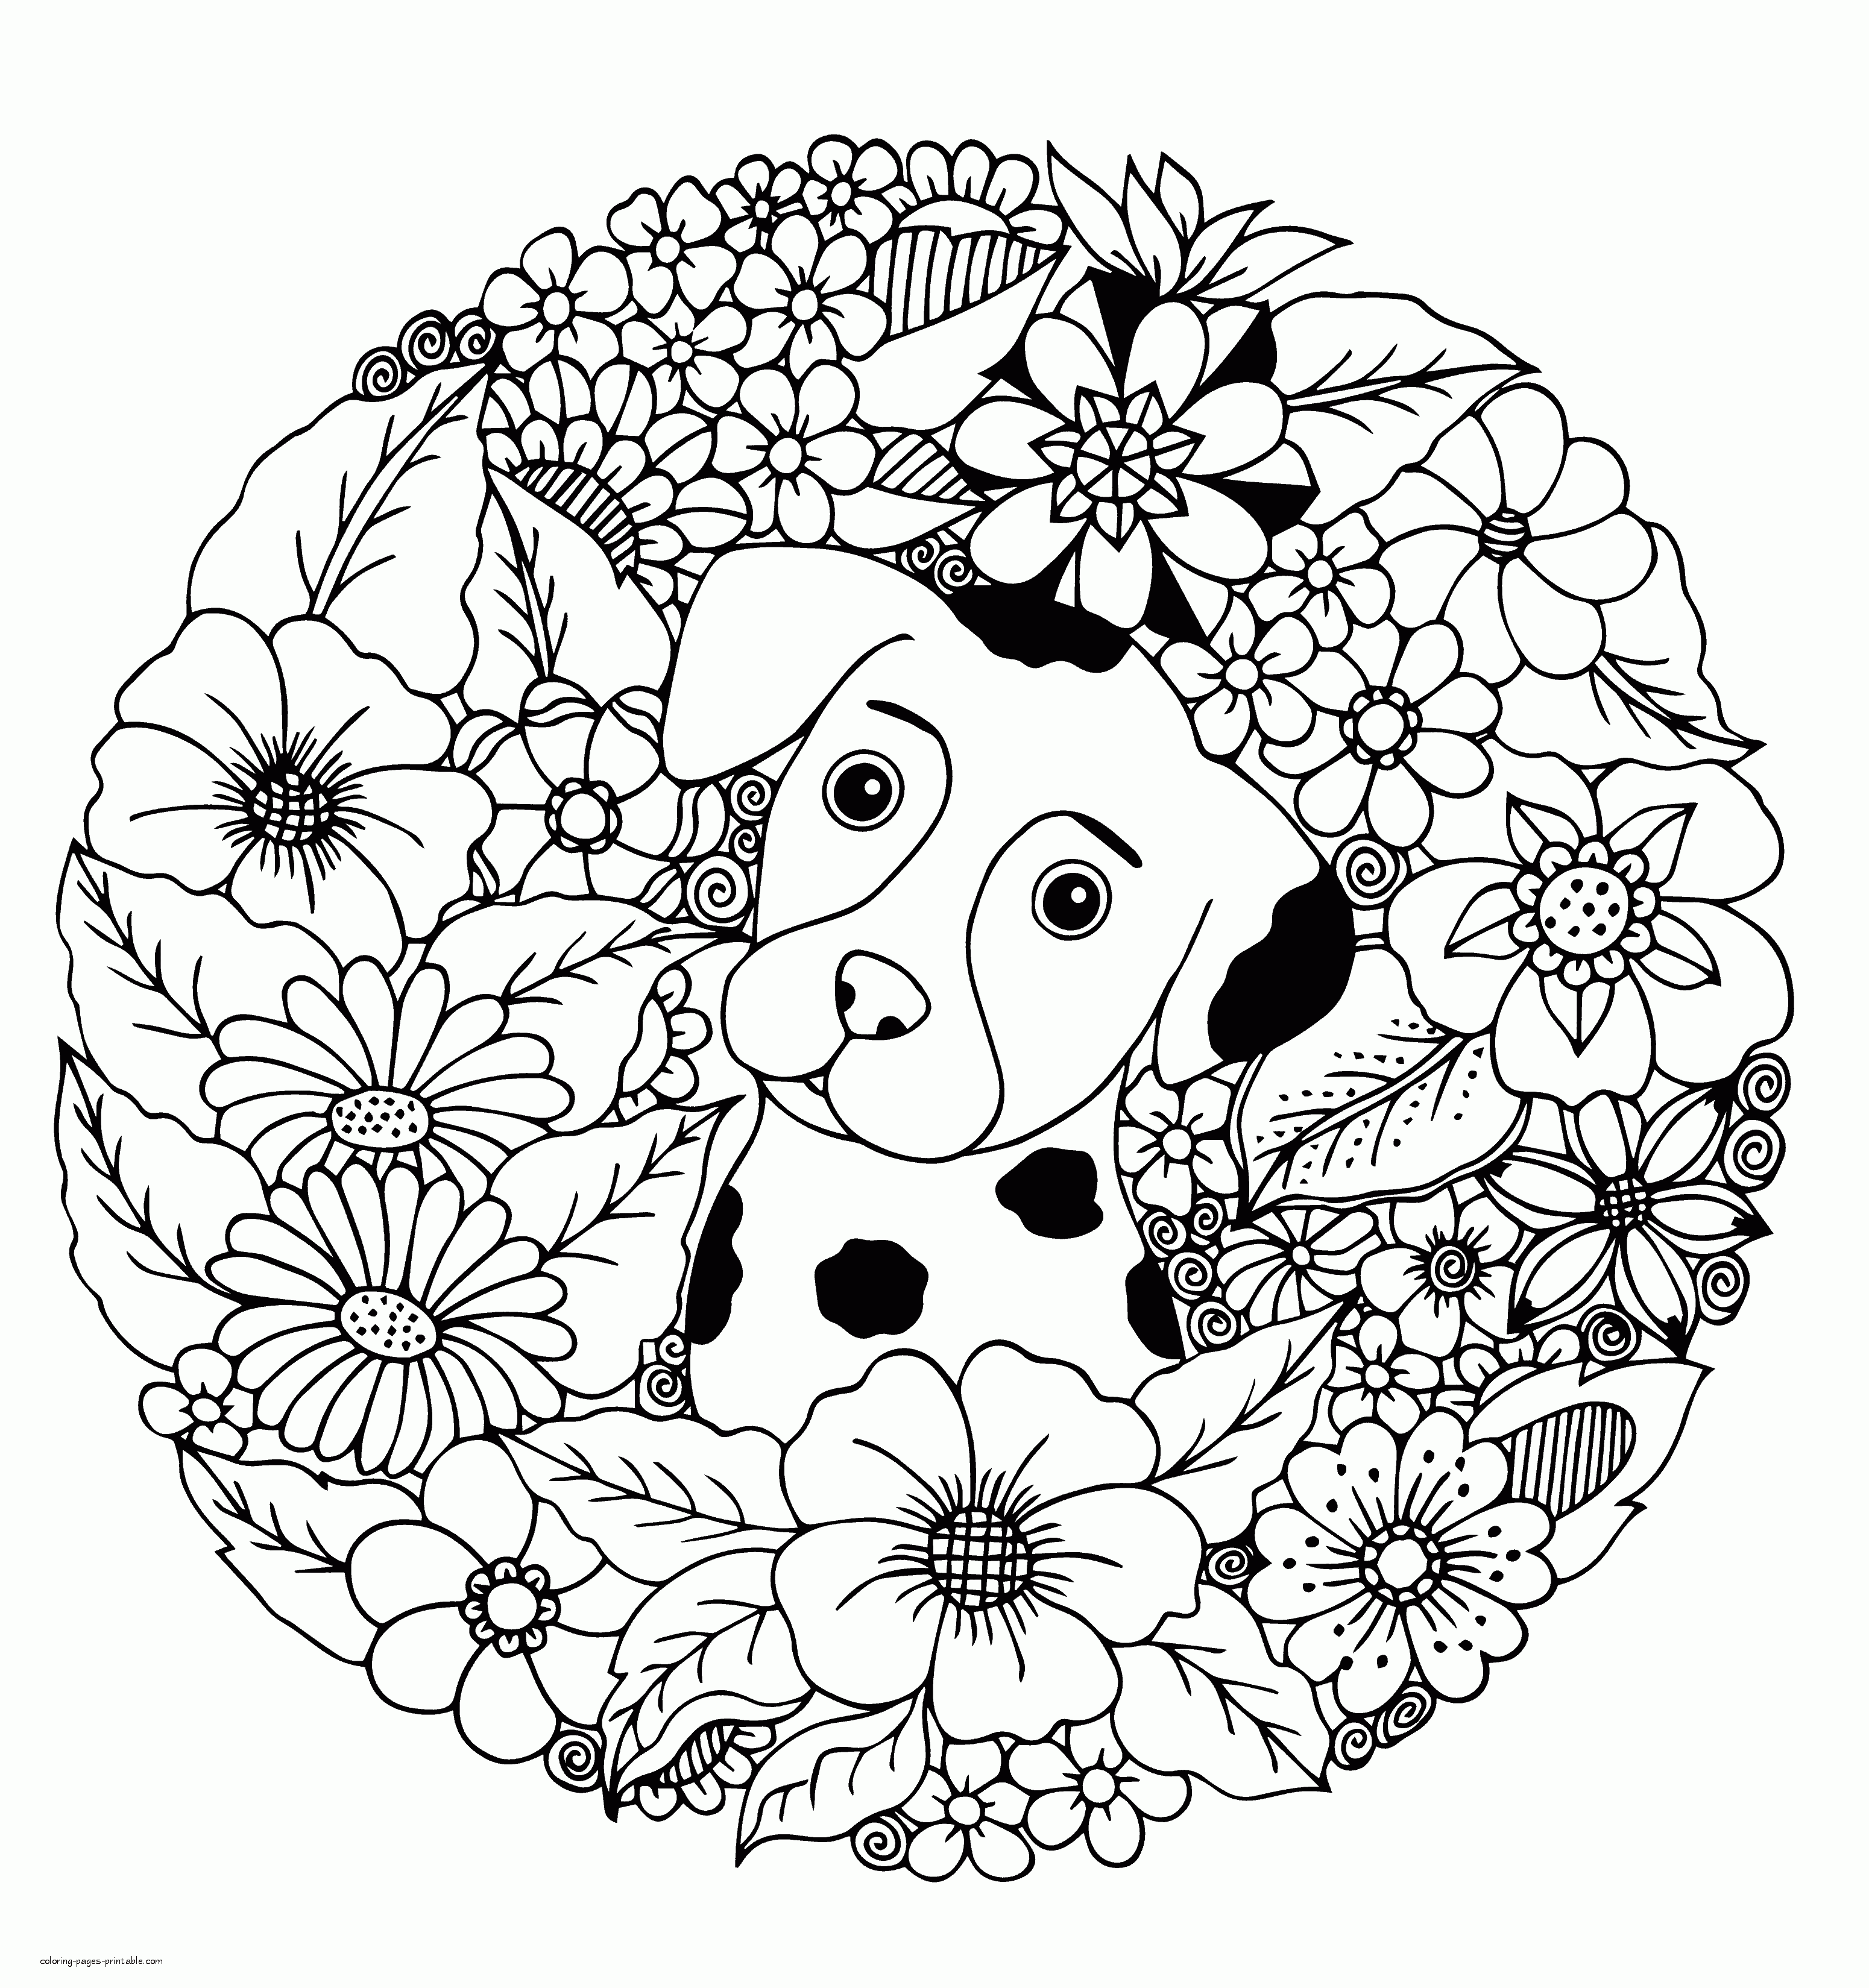 Puppy Coloring Pages For Adults Coloring Pages Printable Com